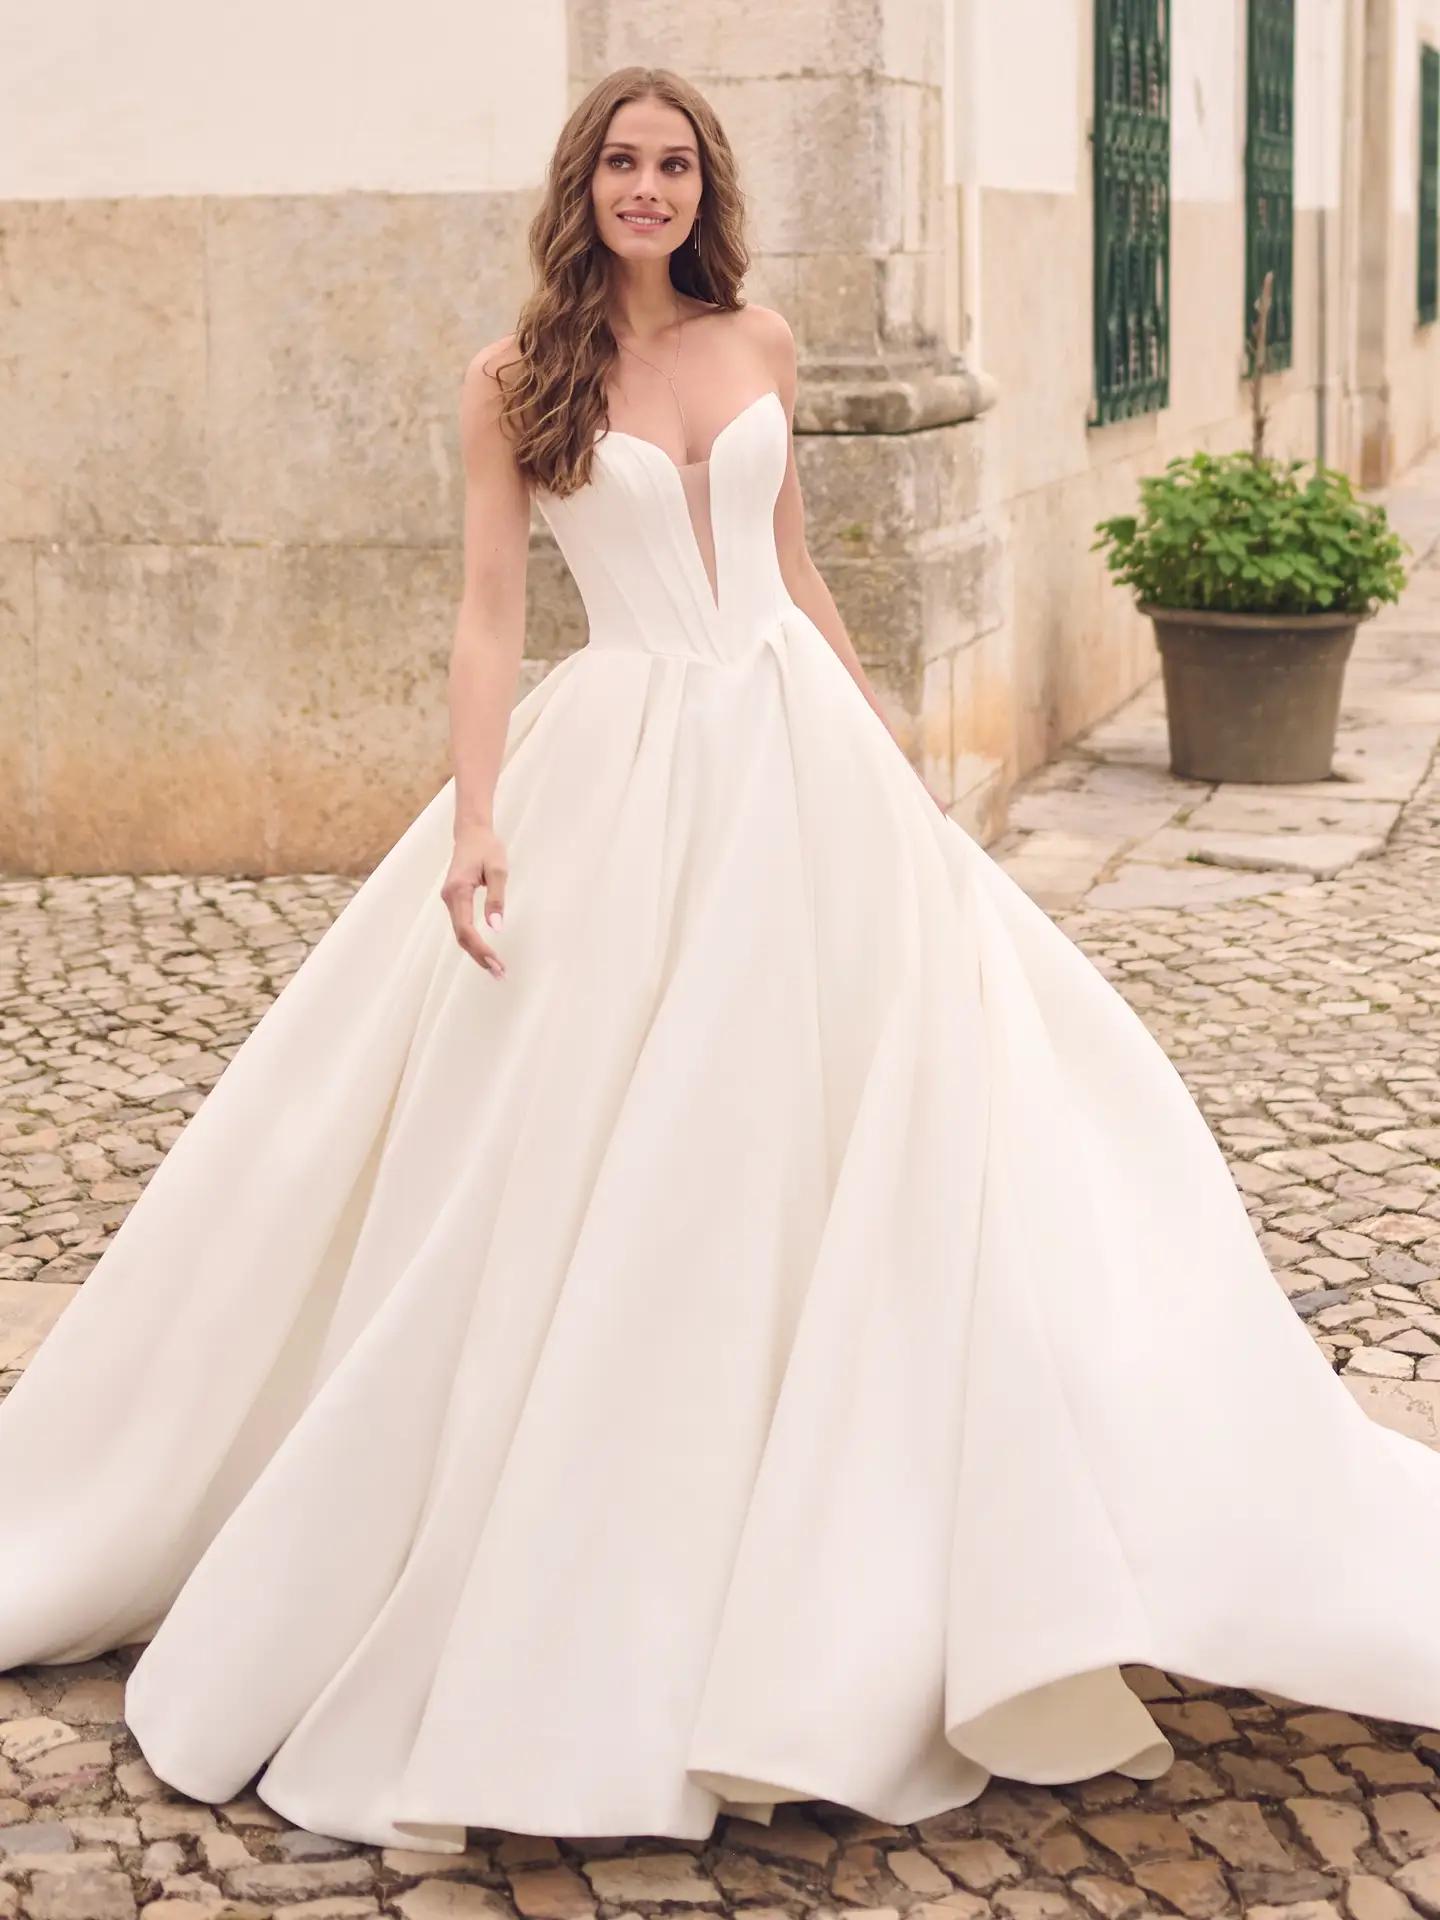 Maggie Sottero Bridal Collection: A Closer Look at the Exquisite Dress Designs Image